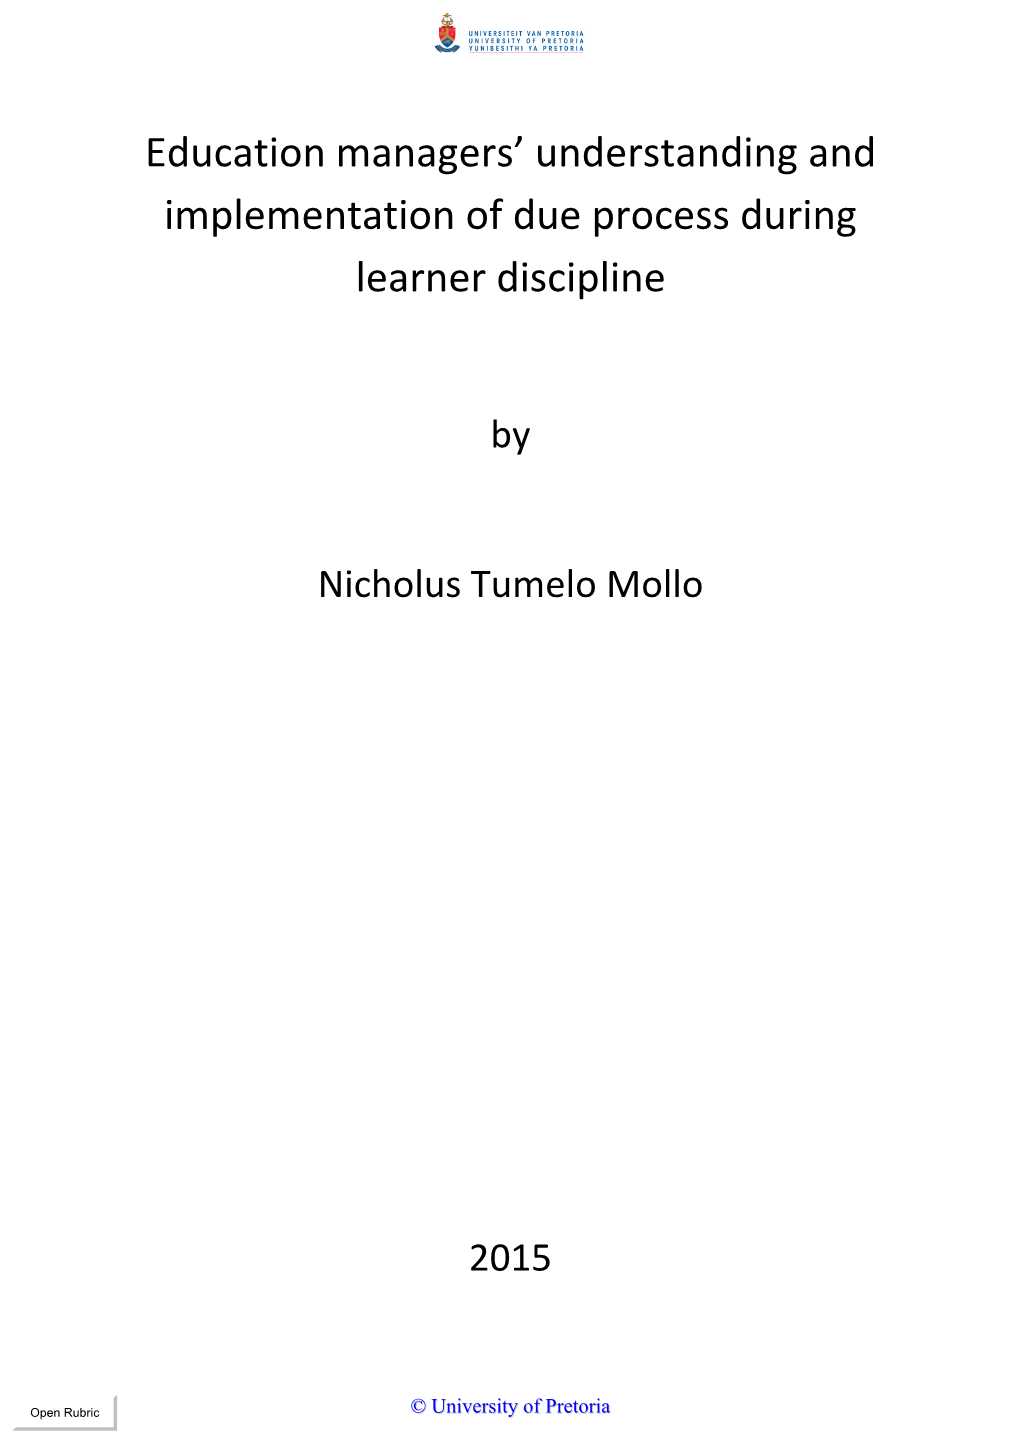 Education Managers' Understanding and Implementation of Due Process During Learner Discipline"